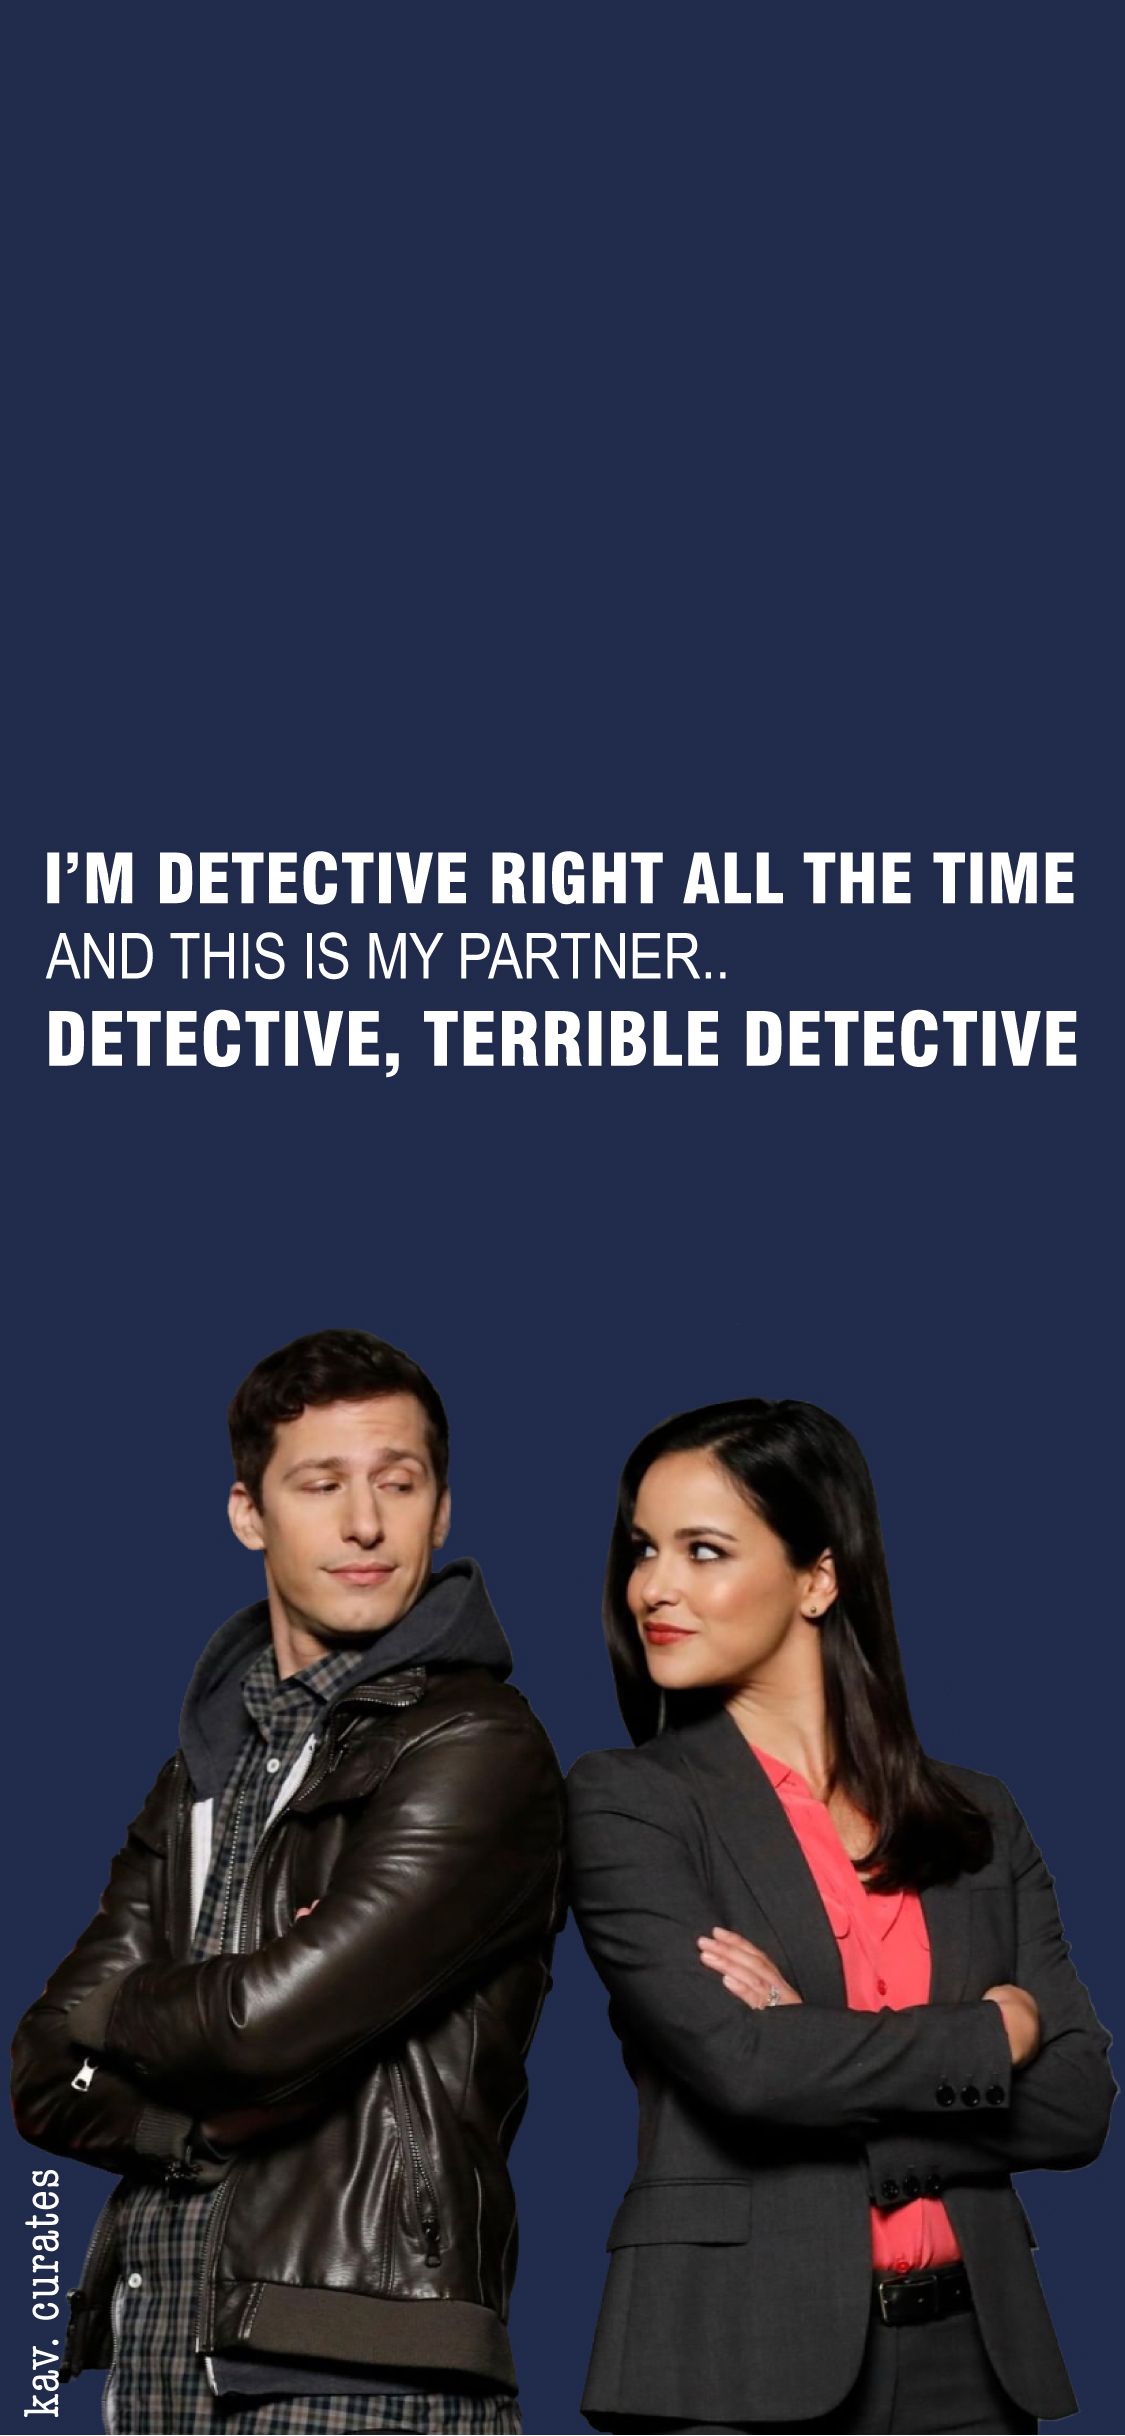 Pin For More Wallpaper Jake And Amy Brooklyn Nine